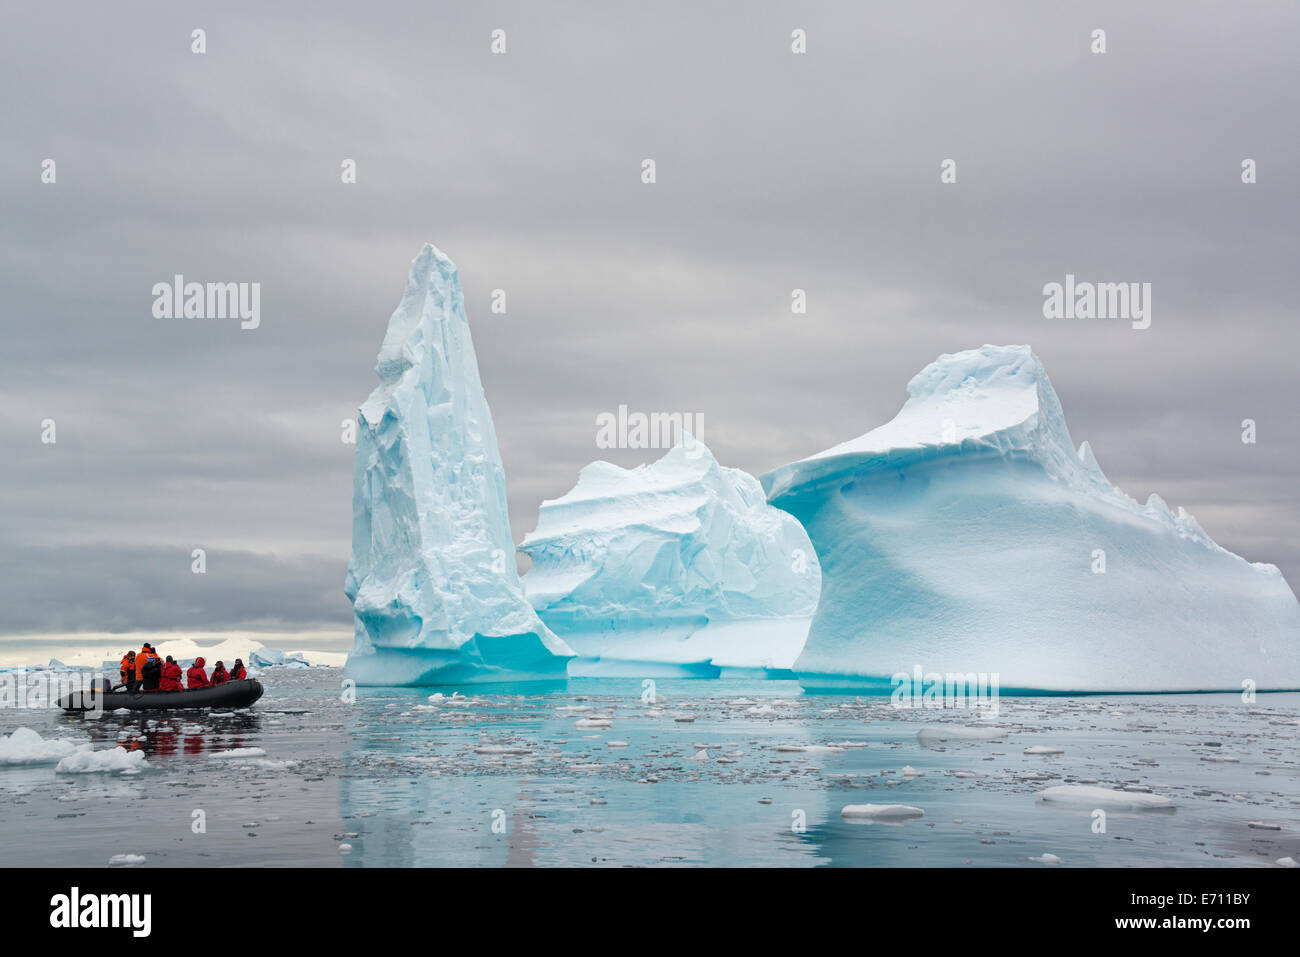 People in small inflatible zodiac rib boats passing towering sculpted icebergs around small islands of the Antarctic Peninsula. Stock Photo